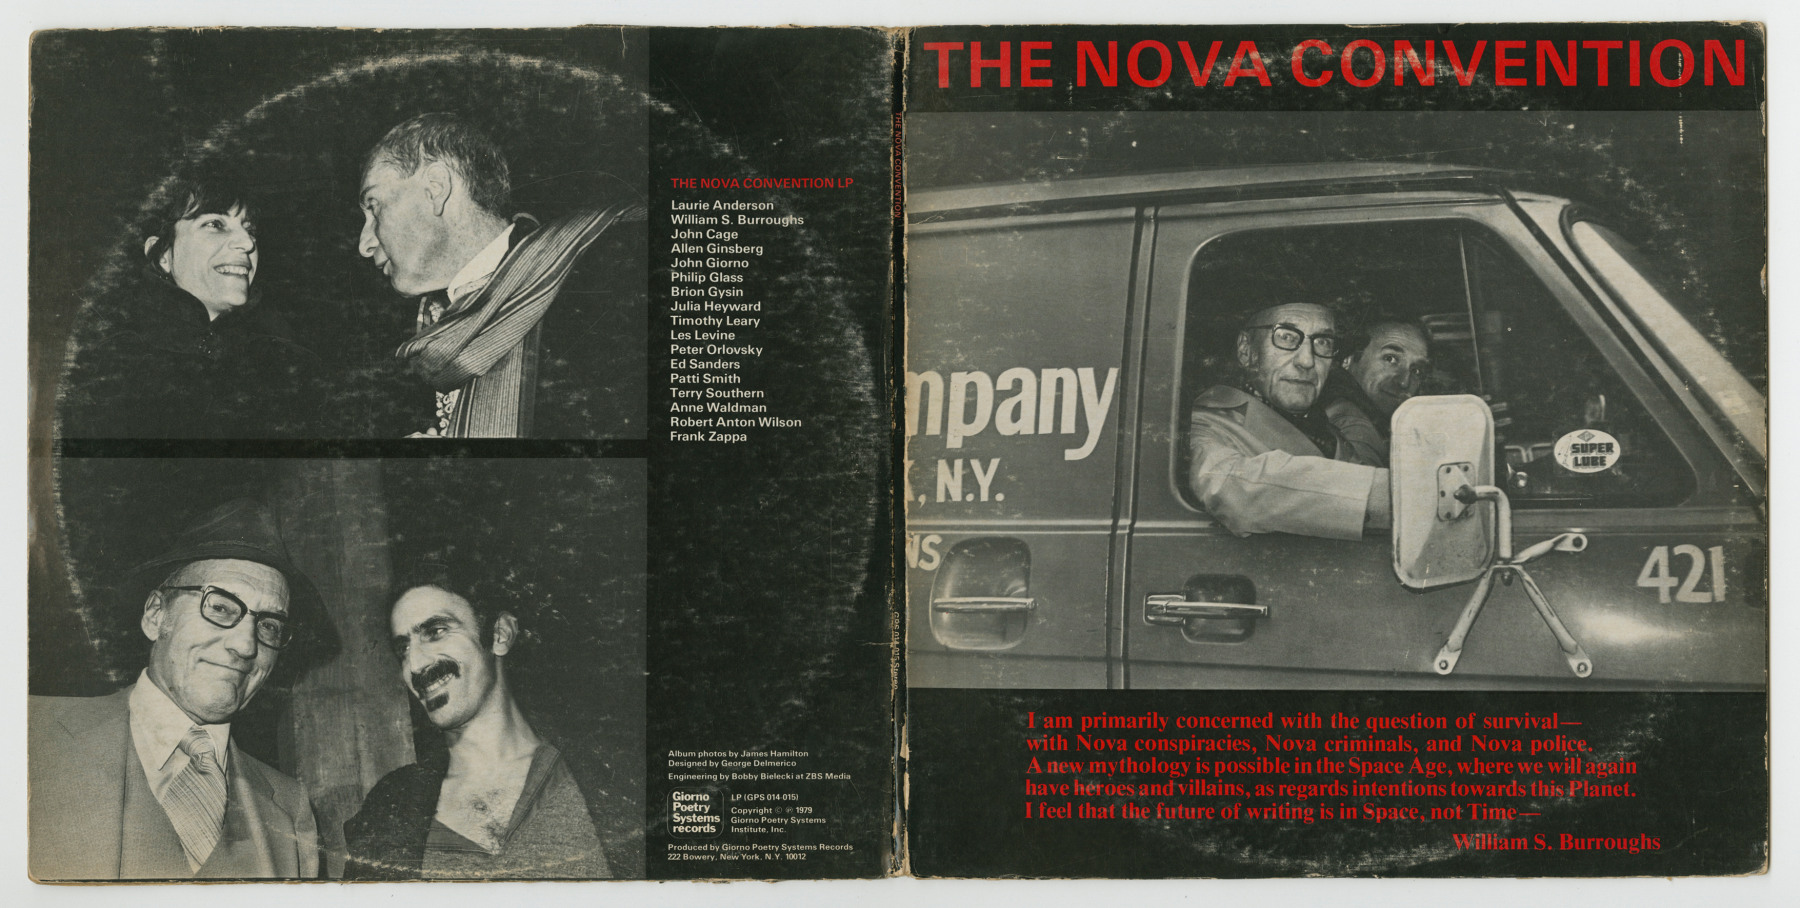 The Nova Convention (1979), front and back covers